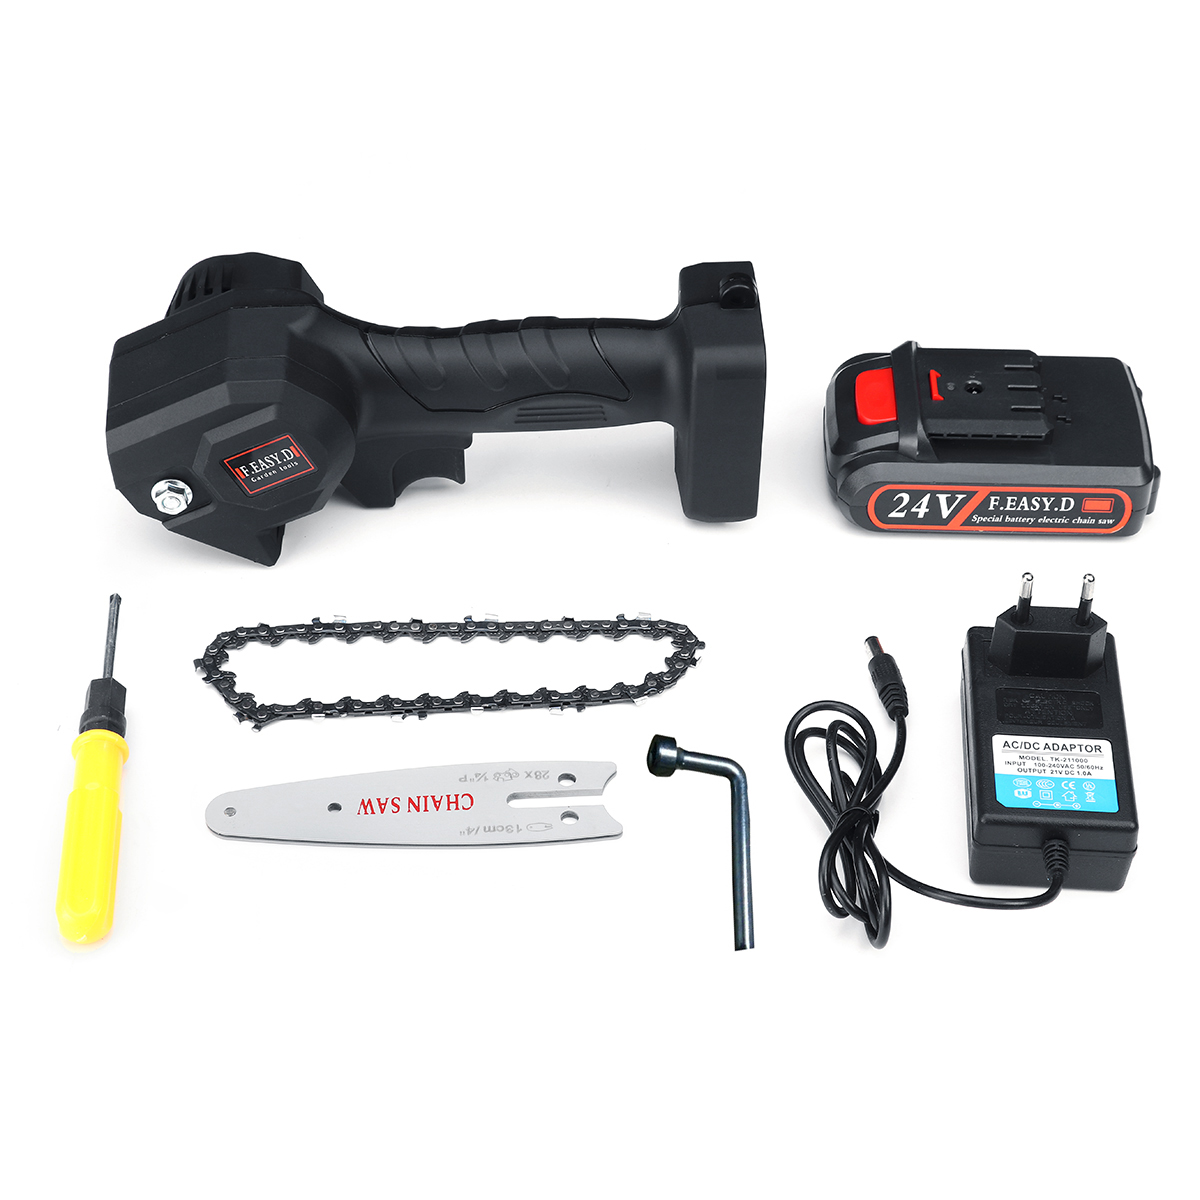 24V-Rechargeable-Cordless-Electric-Saw-Portable-Woodworking-Cutting-Tool-W-Battery-1788980-10